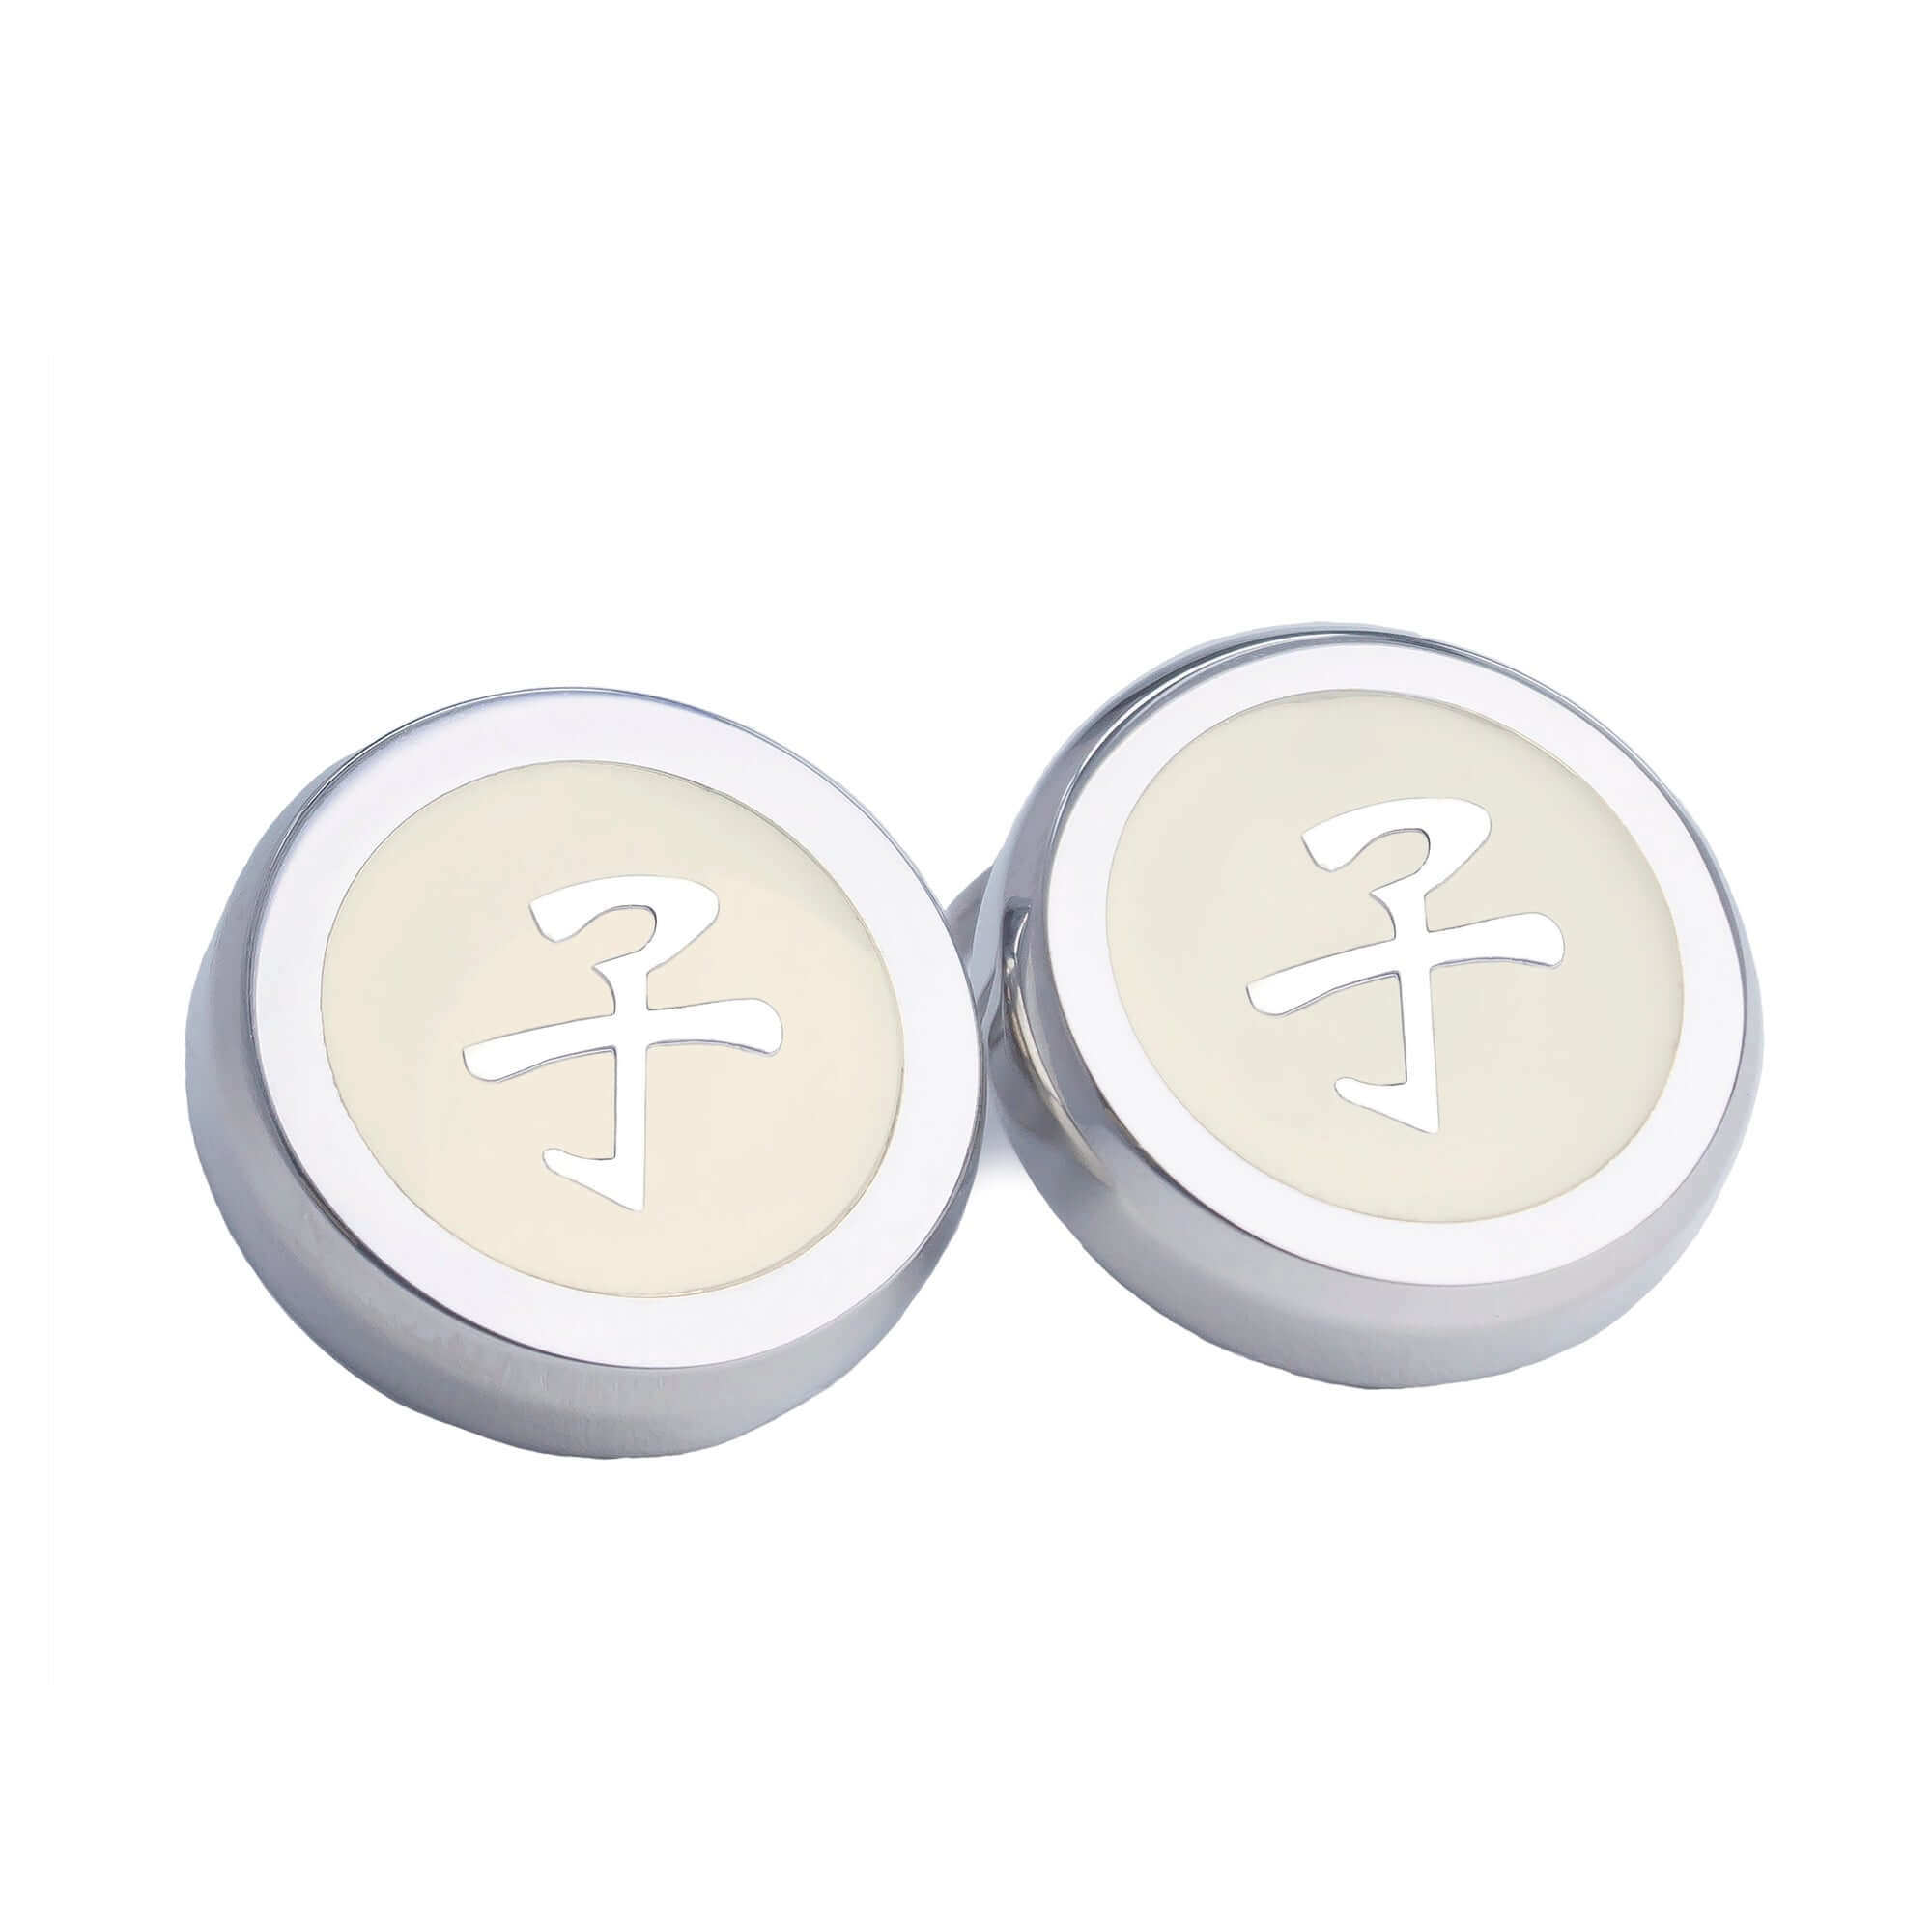 Chinese Character Silver Button Covers-Button Covers-A.Azthom-子 Zi-Cufflinks.com.sg